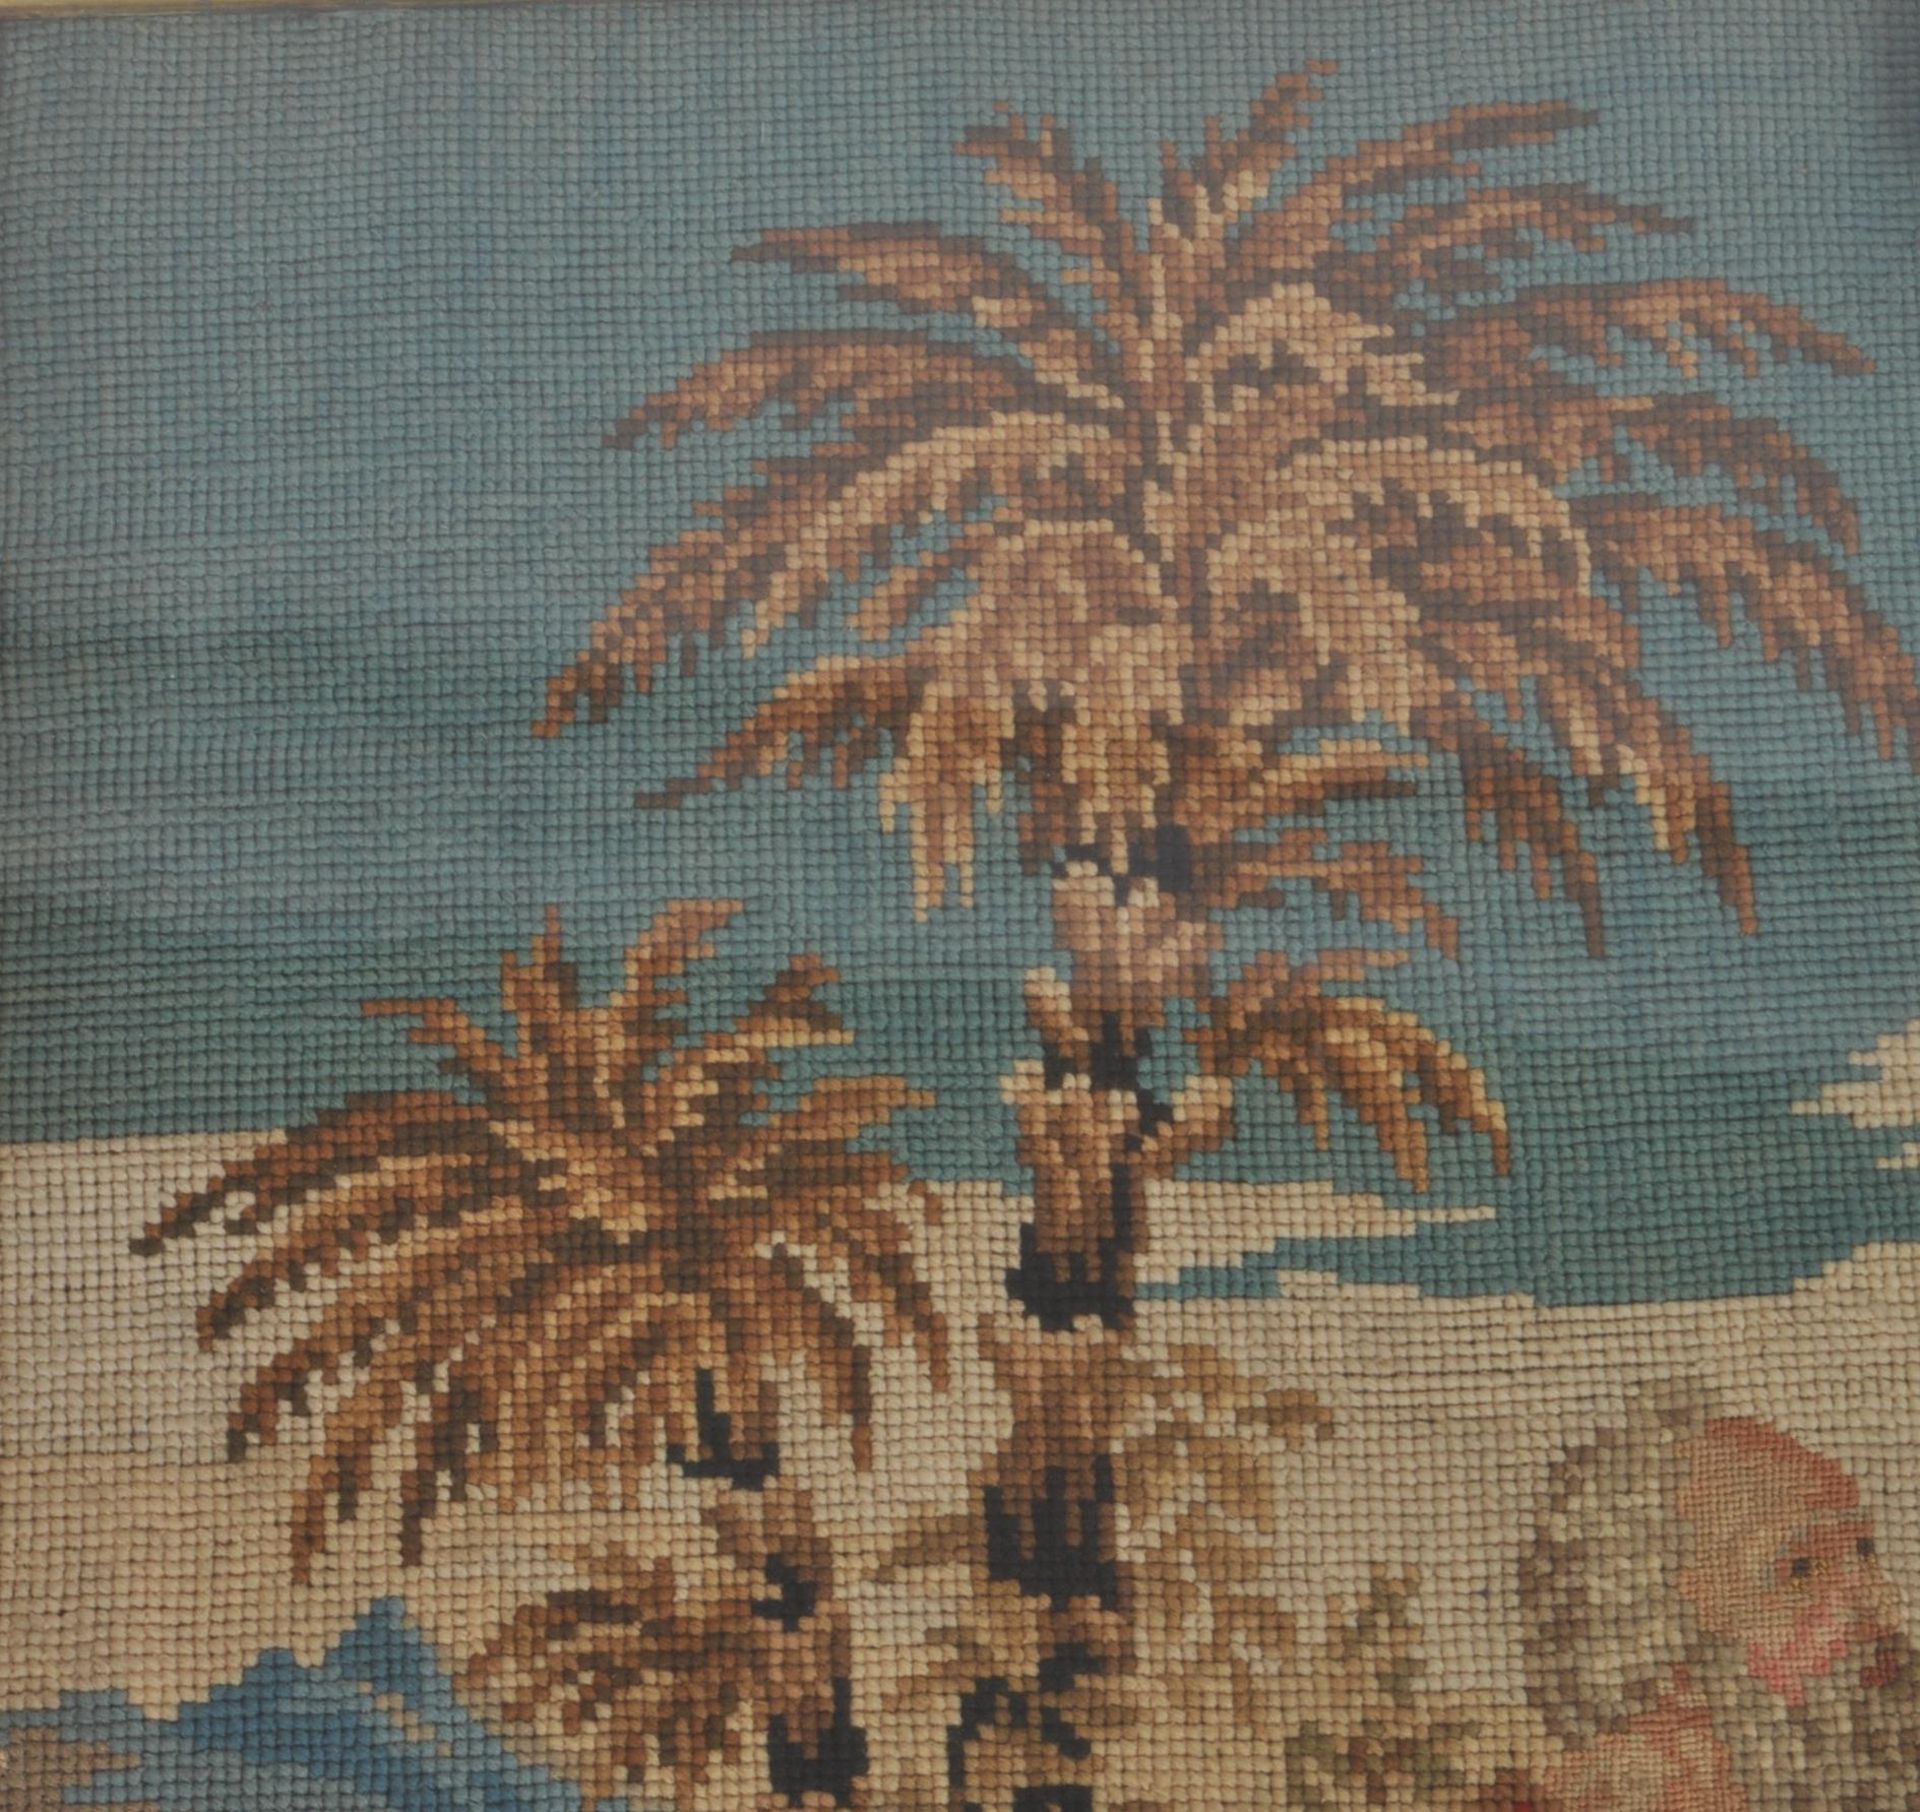 TWO EARLY 20TH CENTURY EMBROIDERY NEEDLEPOINT PICTURES - Image 5 of 5